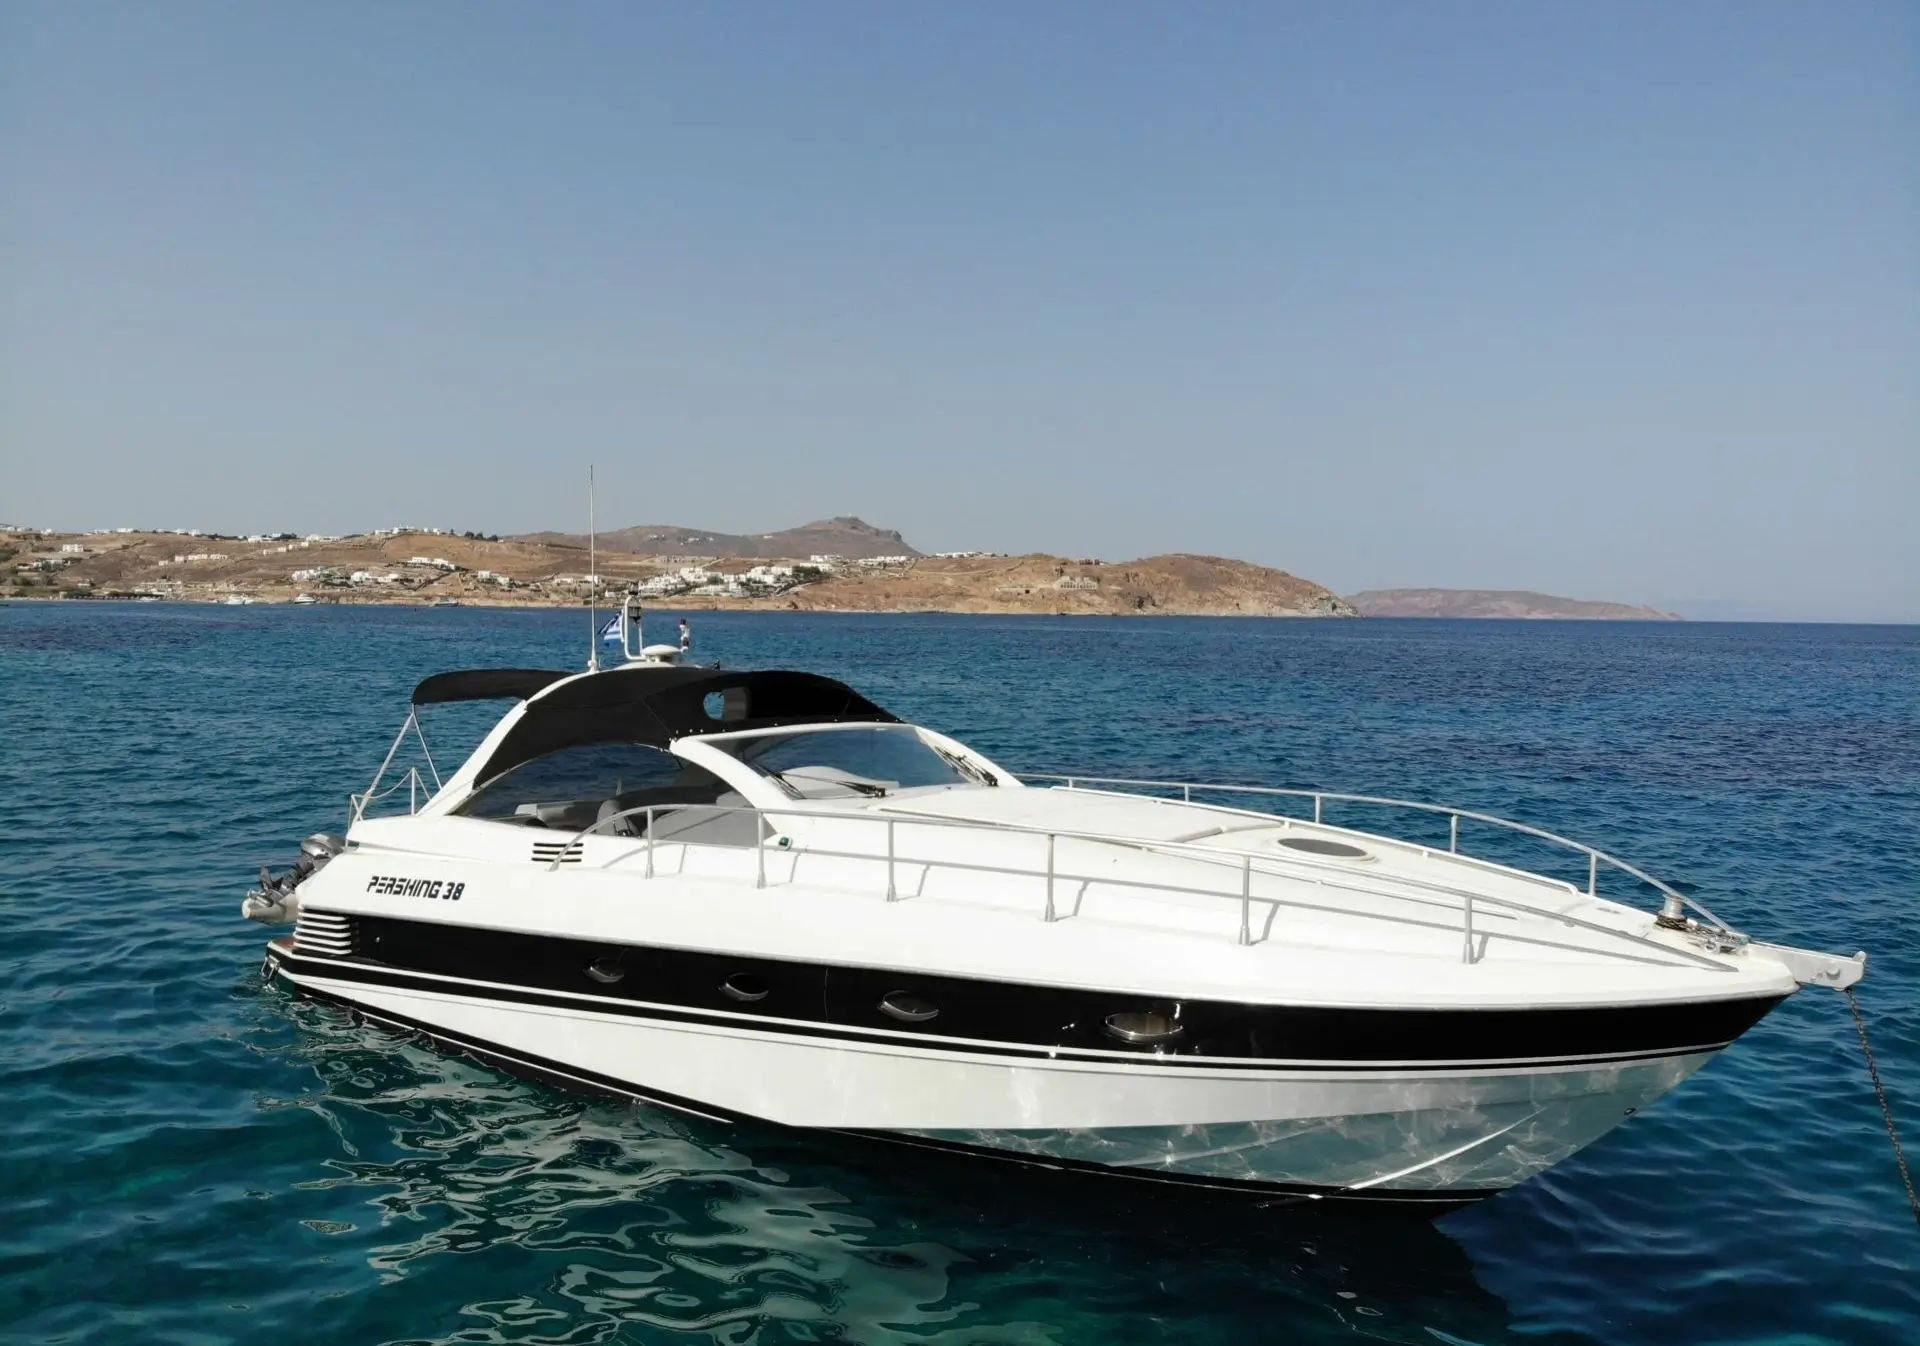 Mykonos Half-Day luxury cruise with motor yacht Pershing 38 Golden Yachting and Sailing